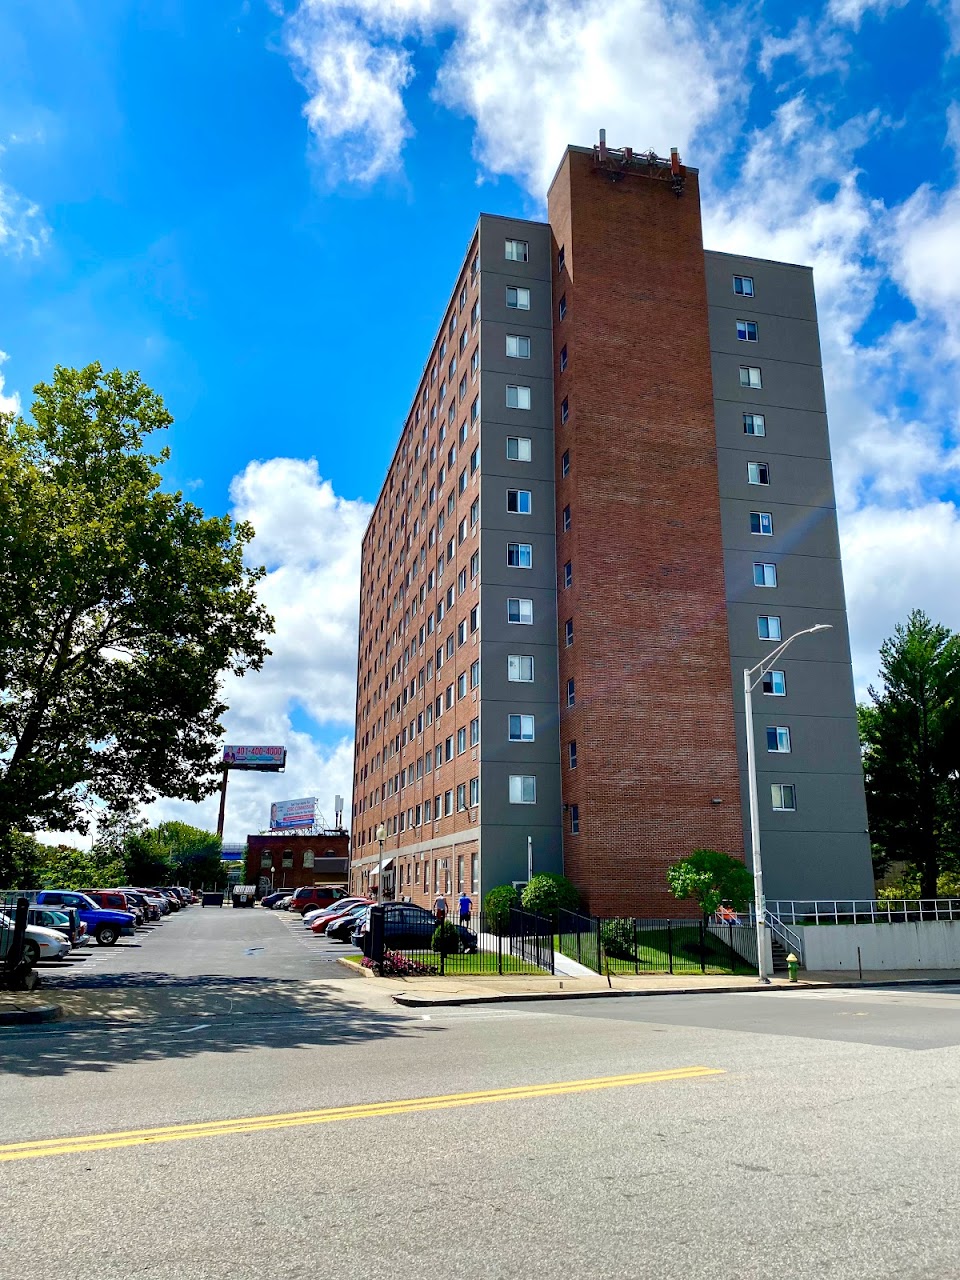 Photo of VALLEY APTS (TRIO SISTERS). Affordable housing located at 1 VALLEY ST PROVIDENCE, RI 02909